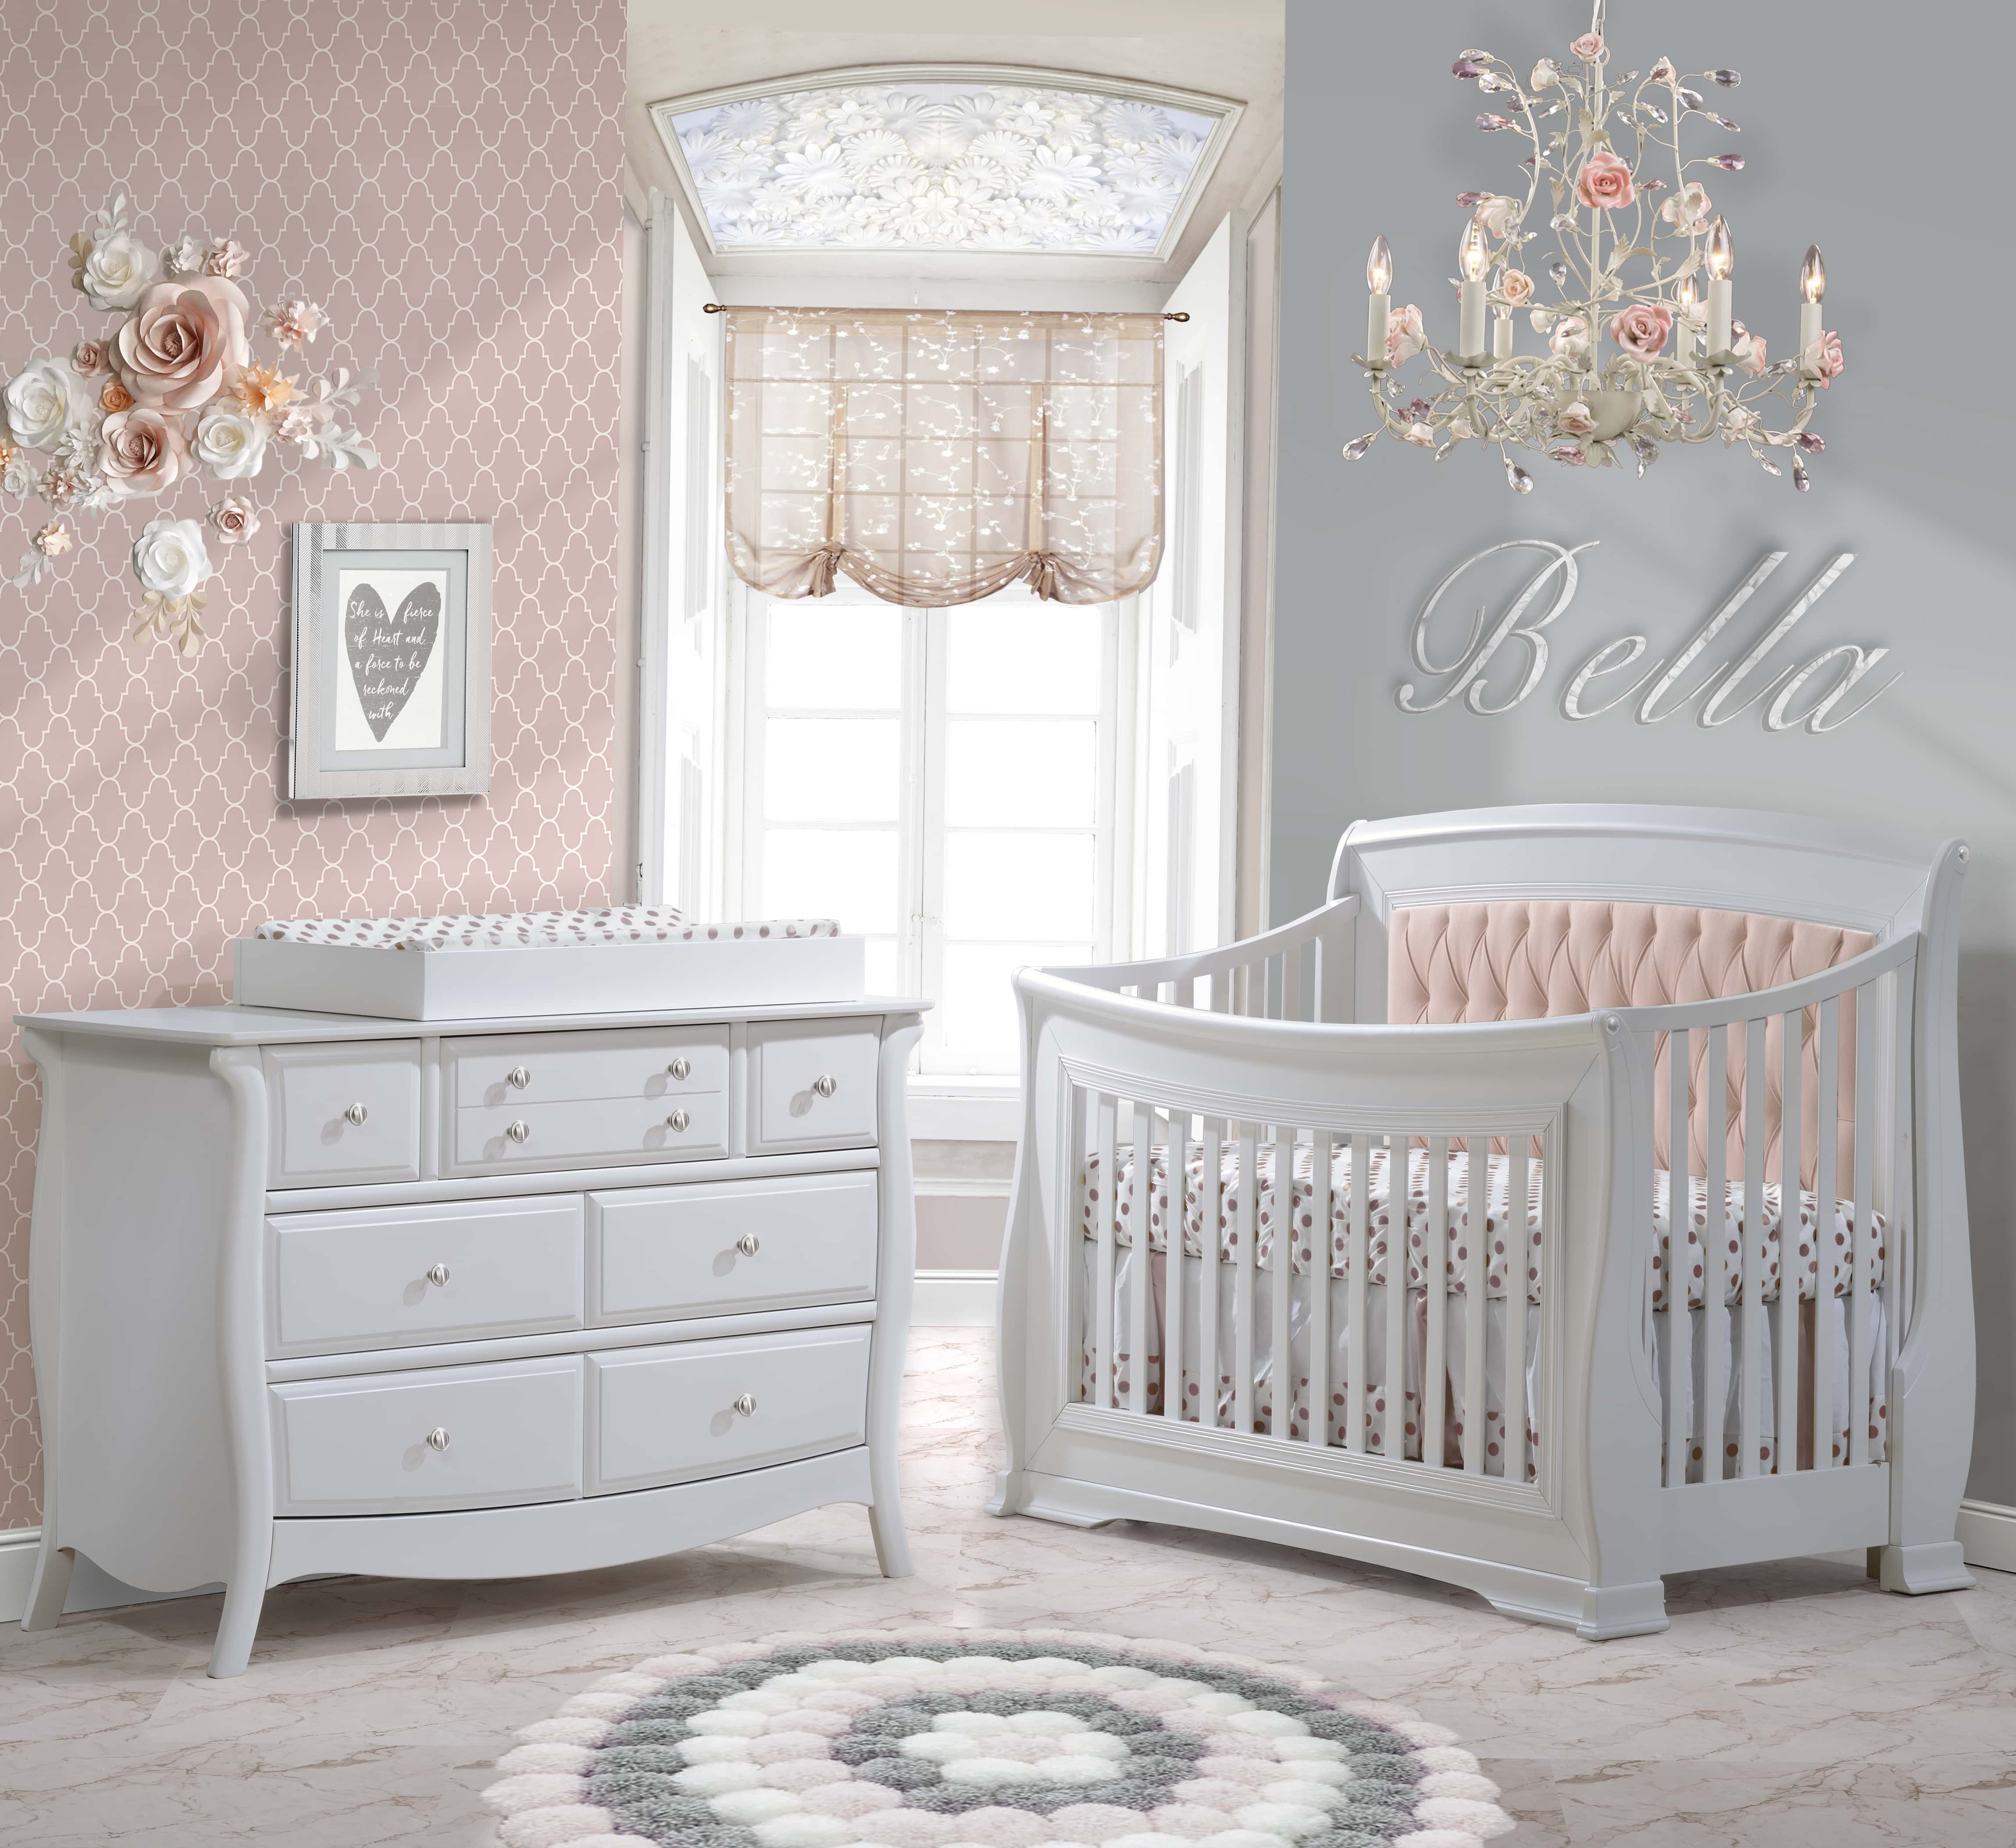 Bella 5 In 1 Convertible Crib With, Baby Crib With Upholstered Headboard